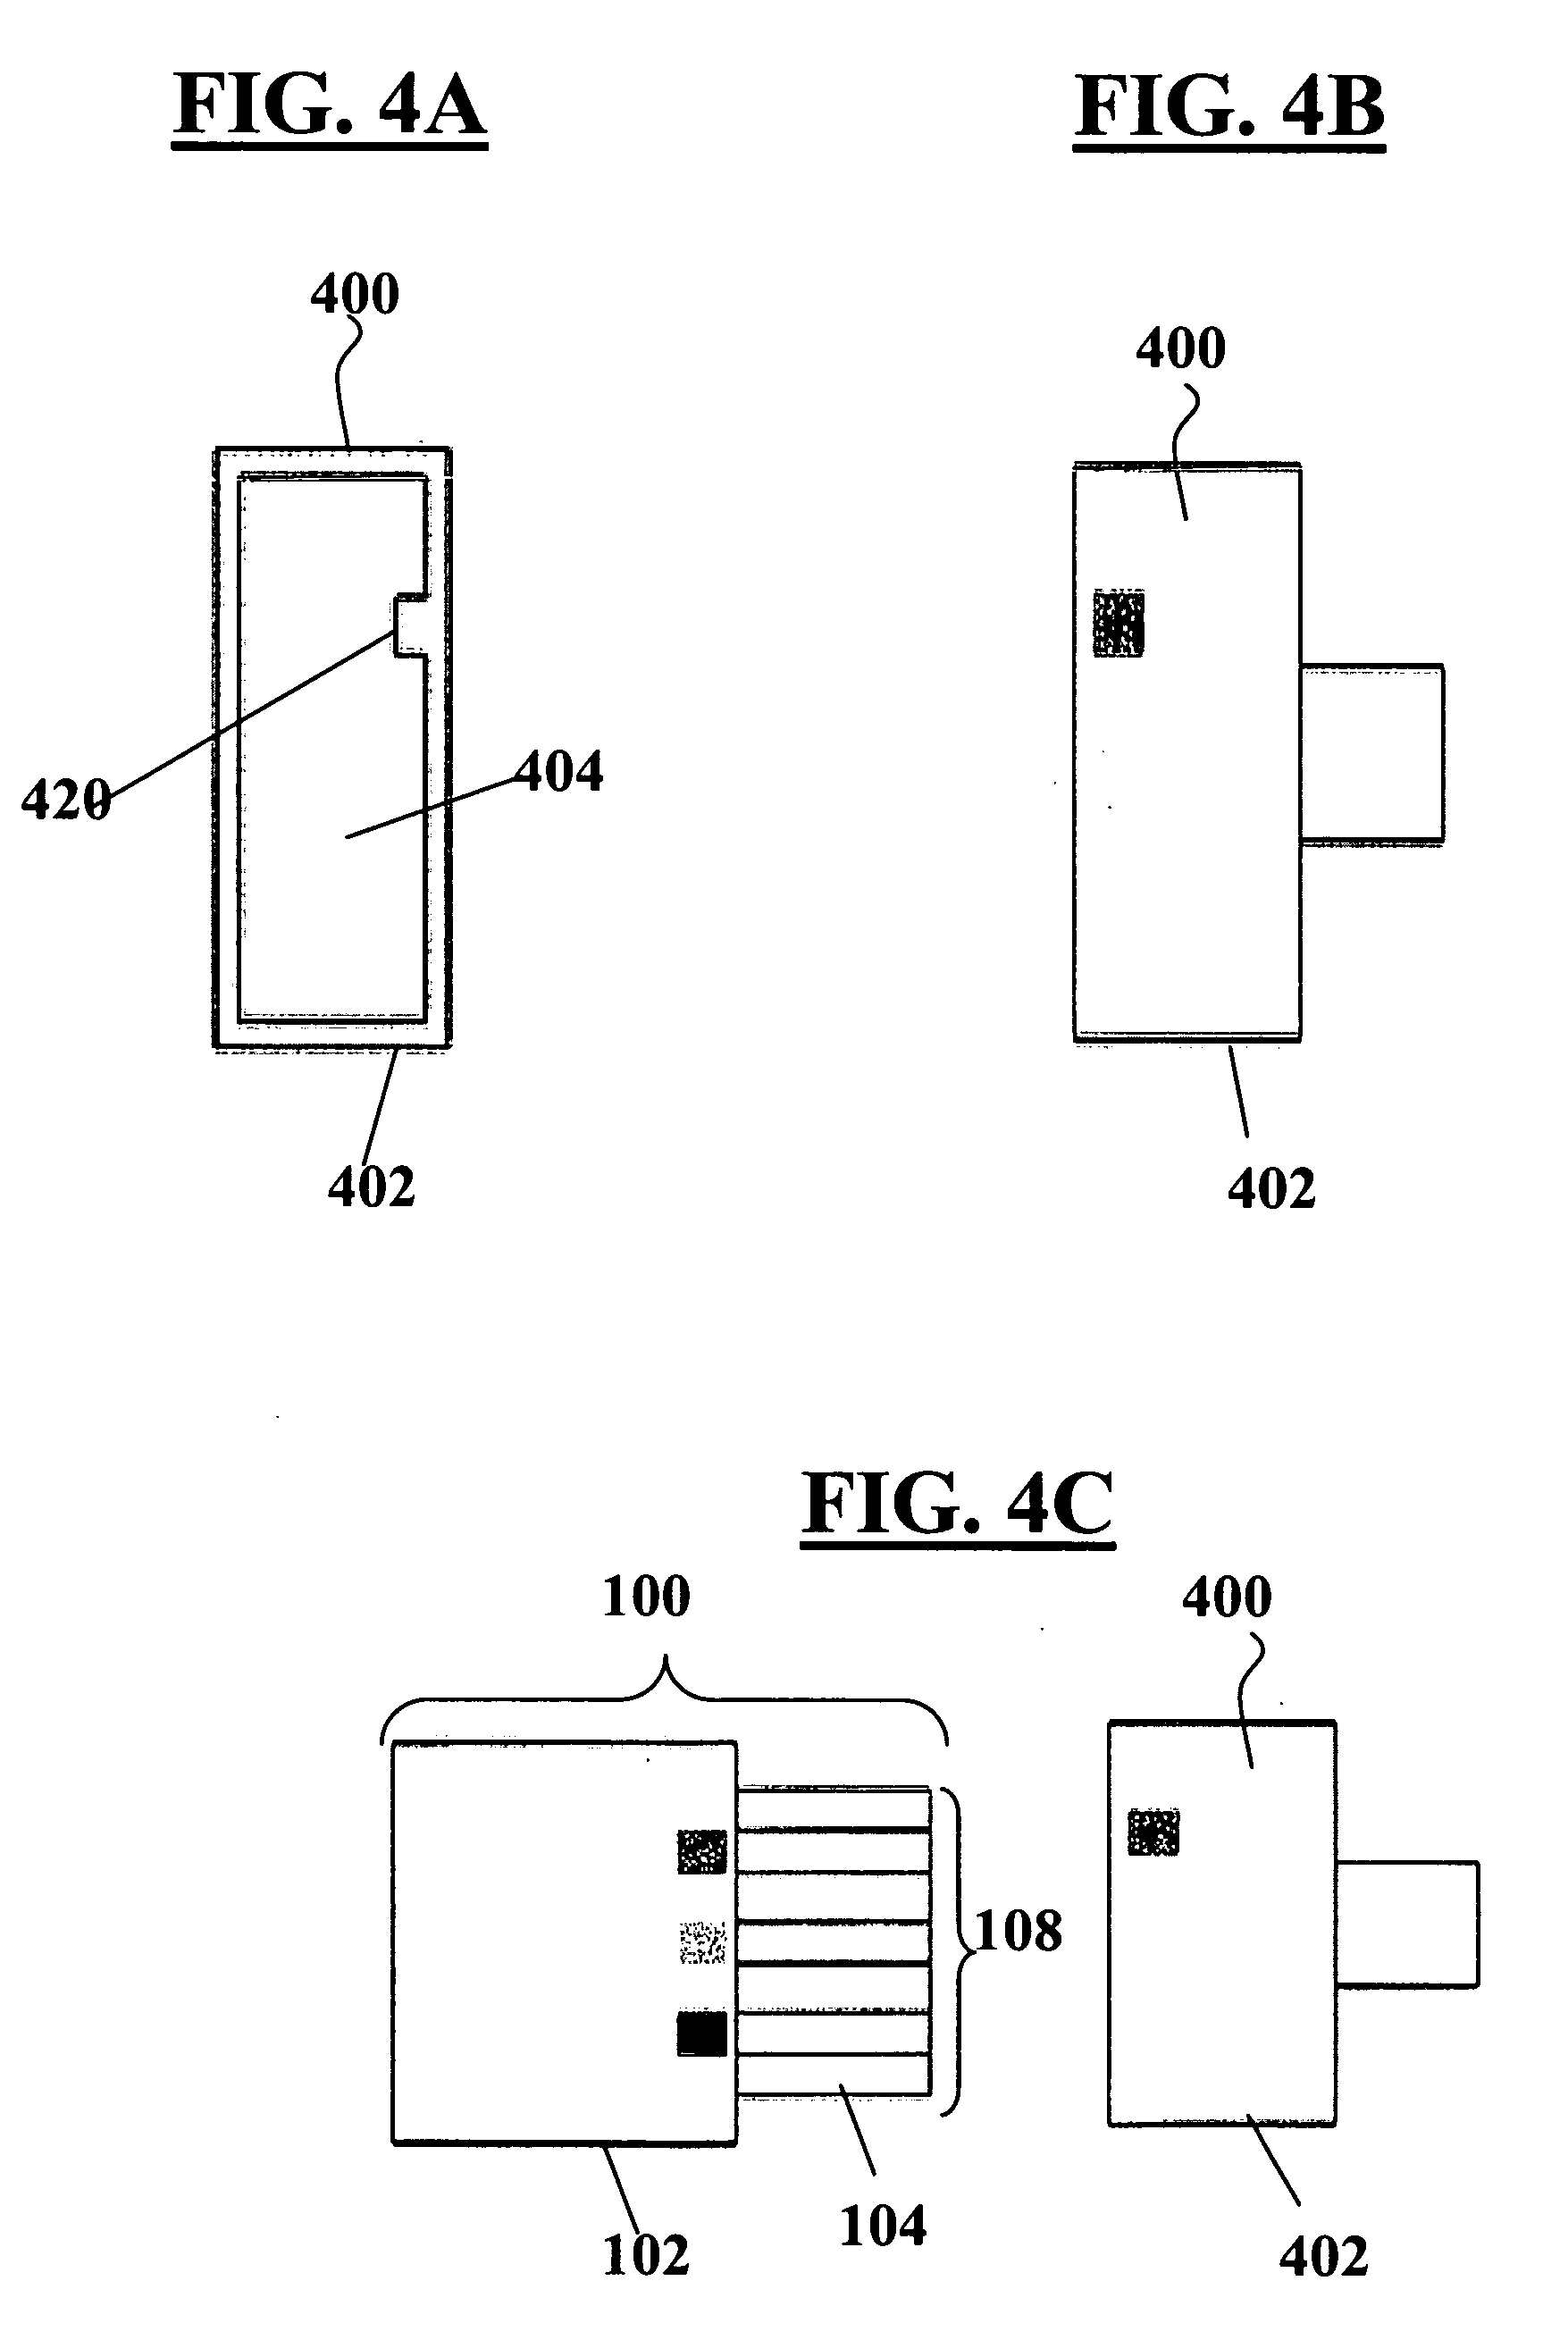 Key coded power adapter connectors